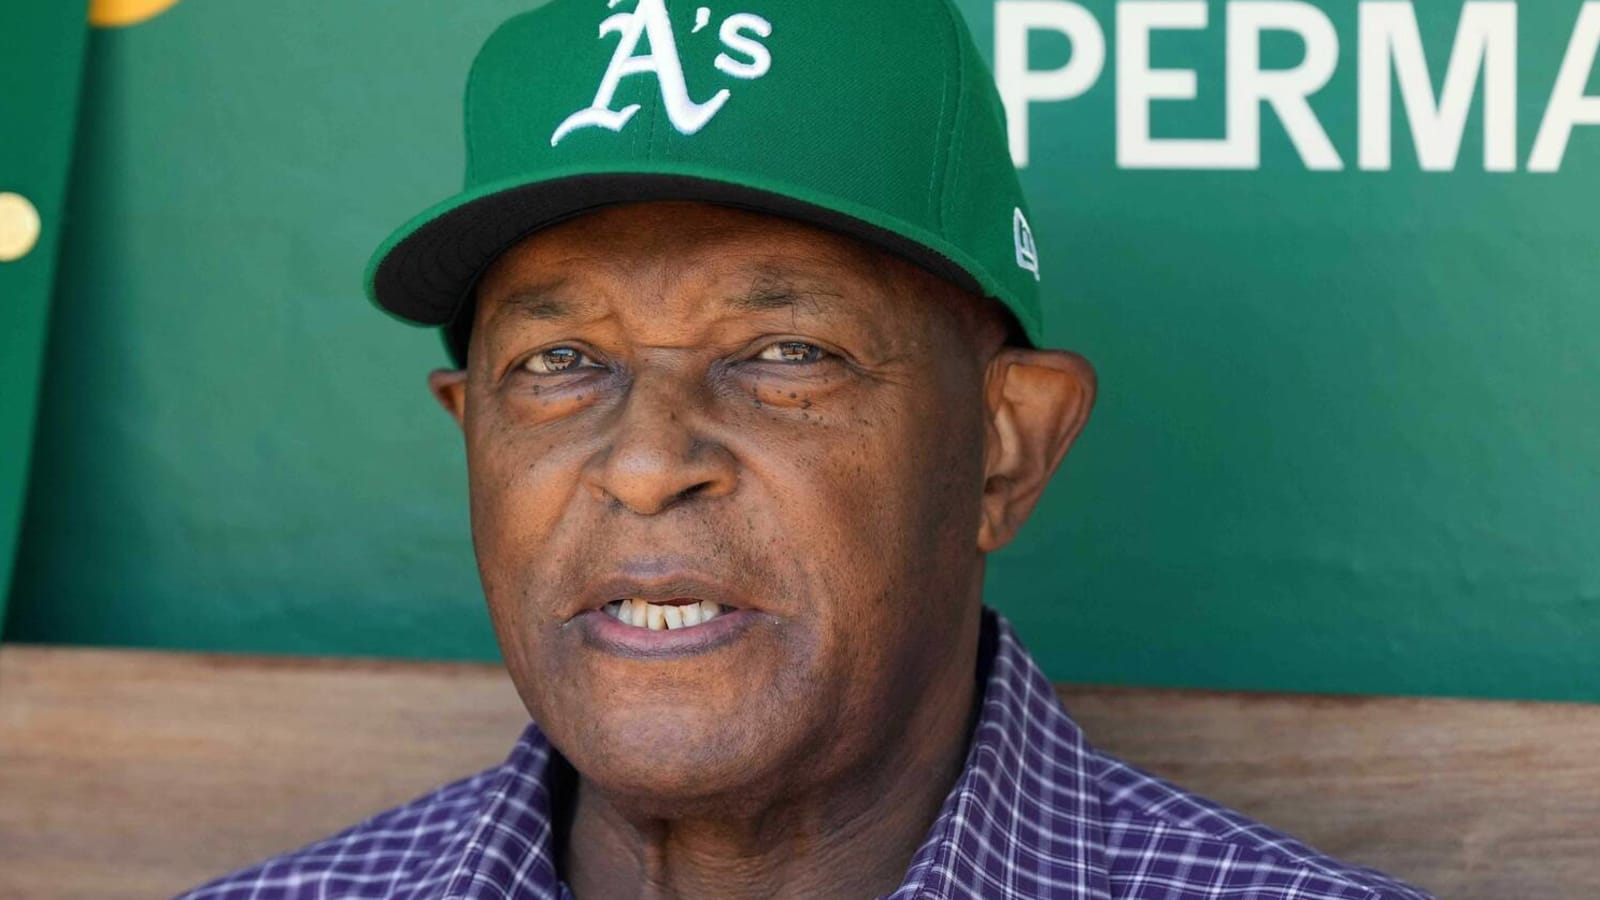 Vida Blue was the last AL player to accomplish this rare feat